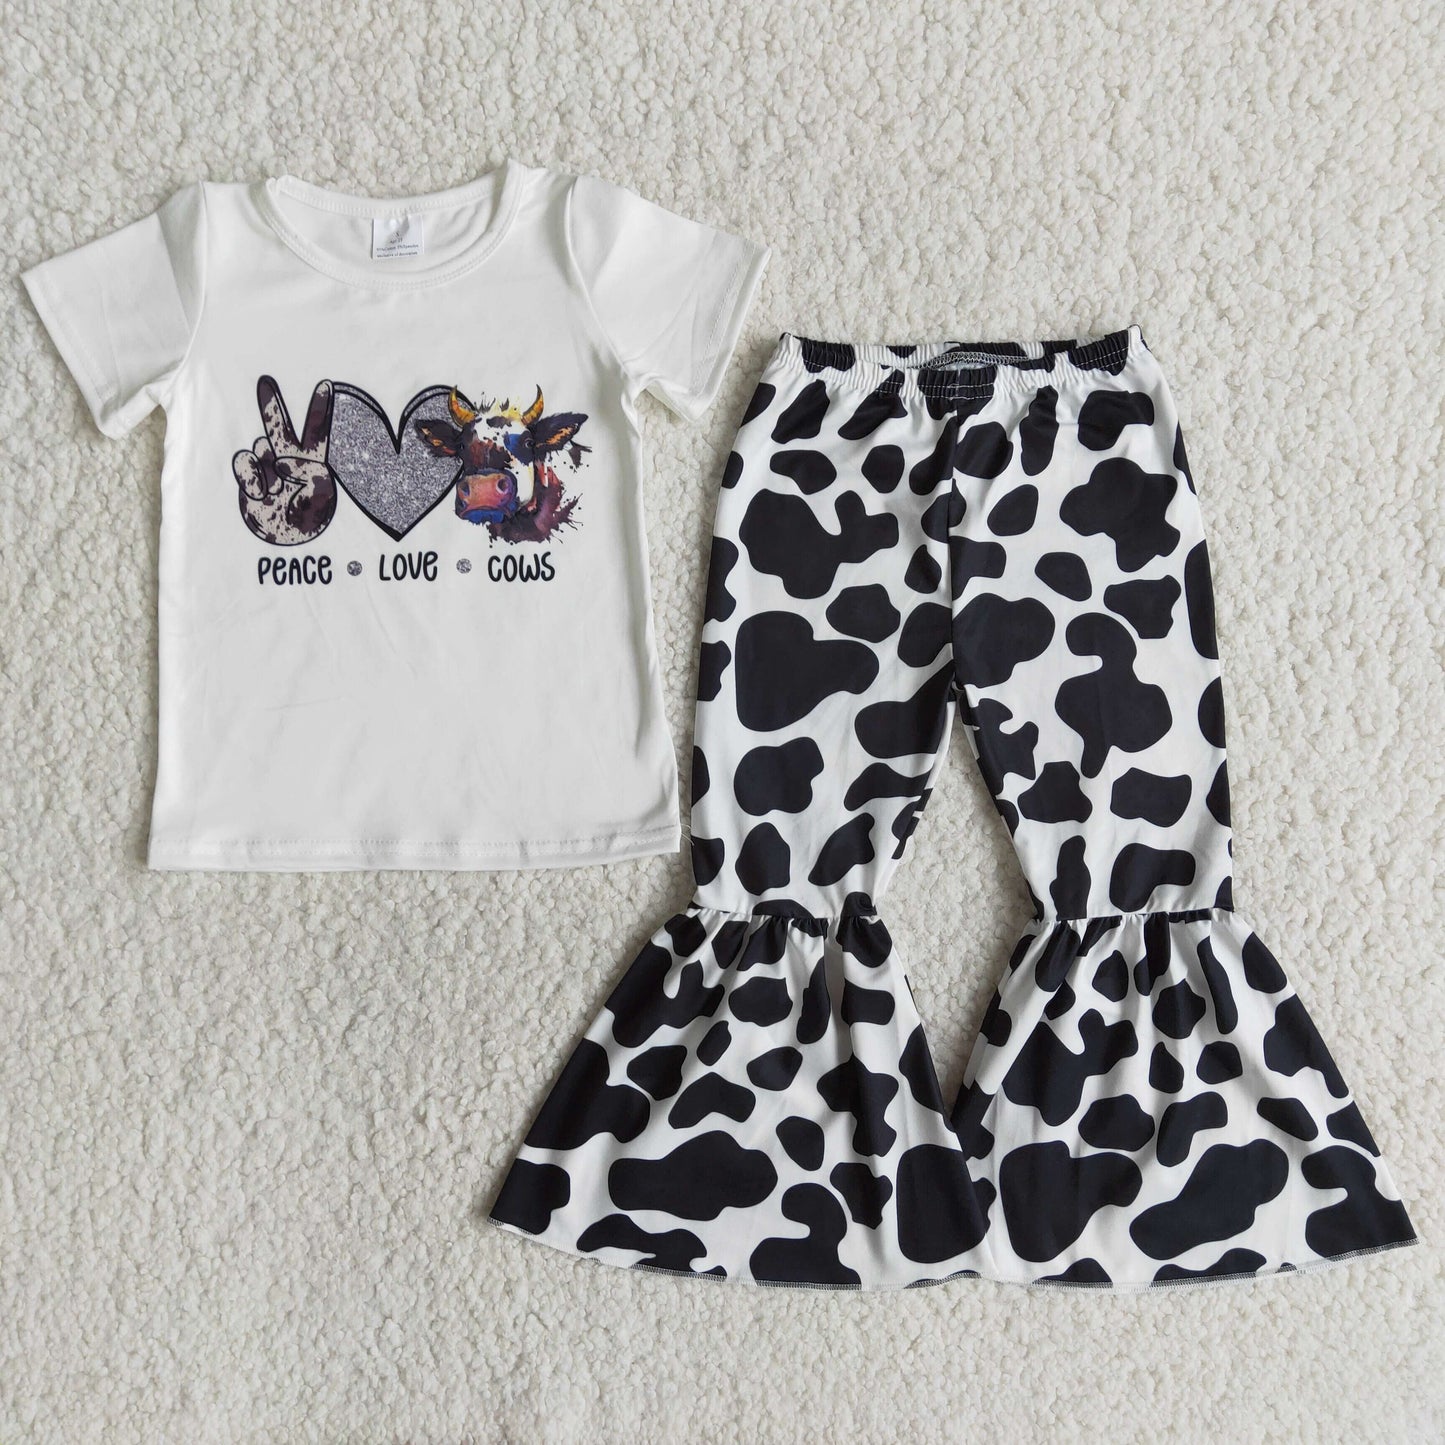 Peace love cows white shirt bell bottom pants girls children outfits